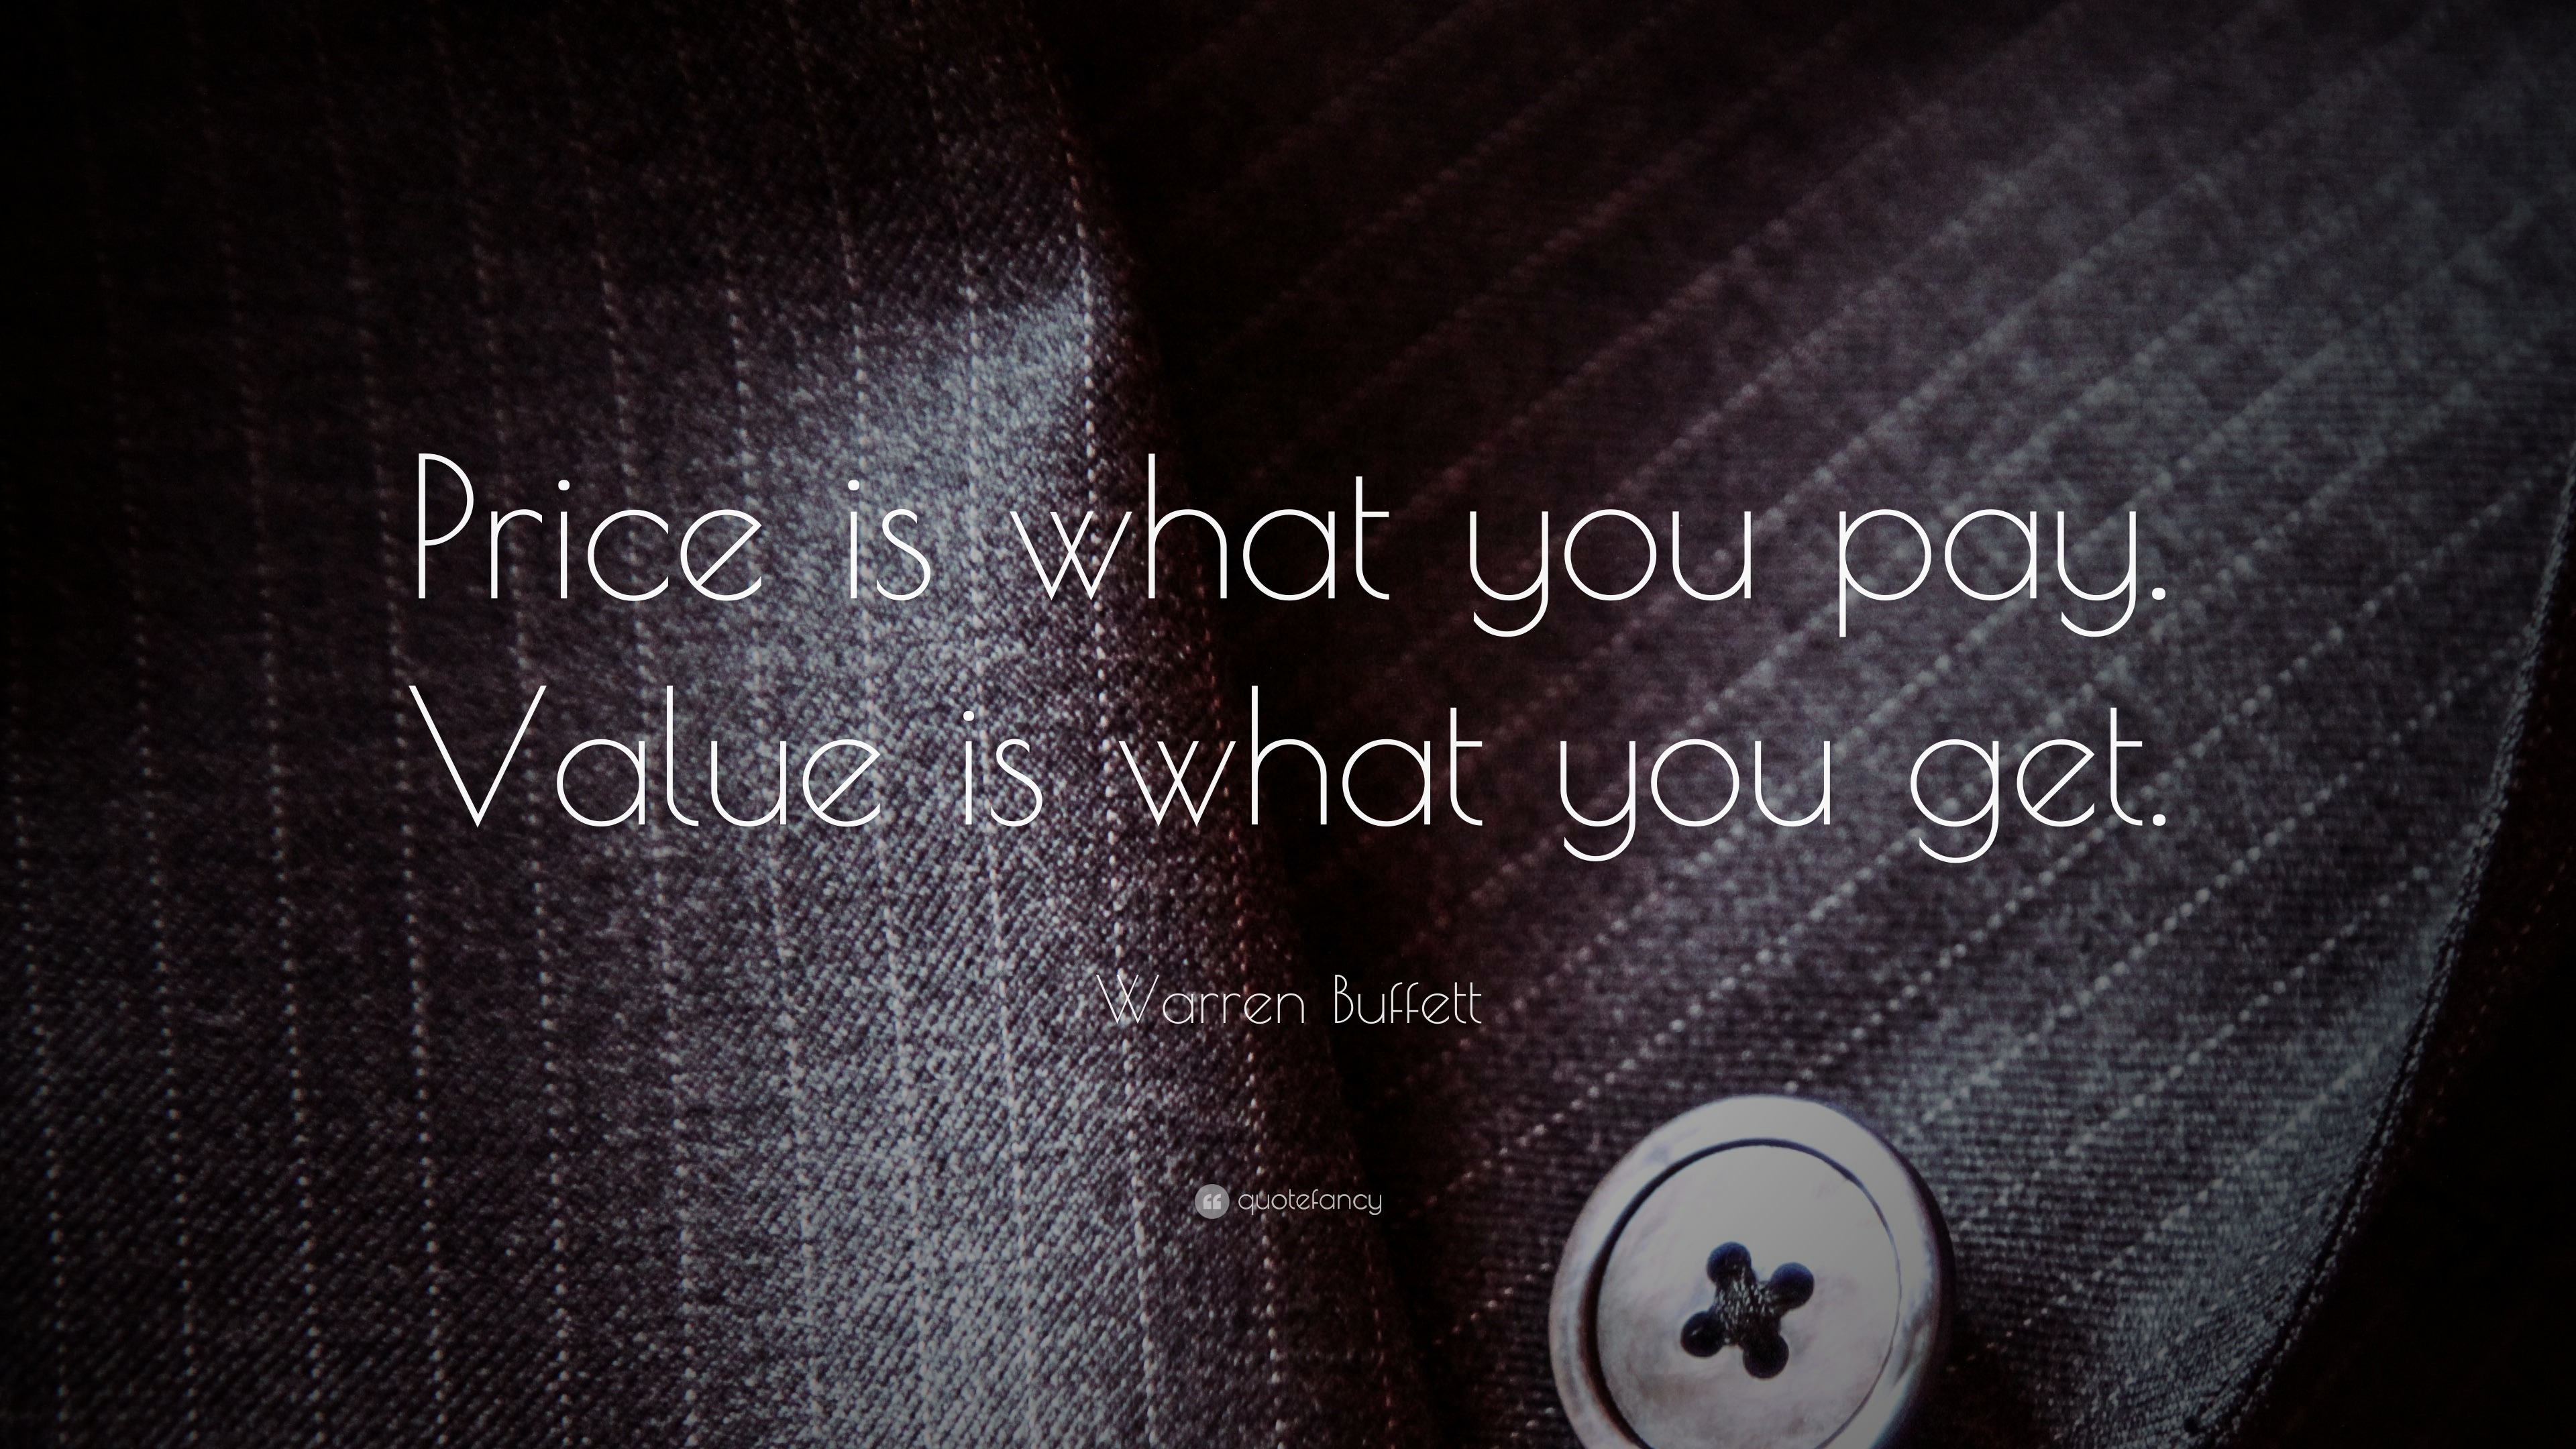 Warren Buffett Quote: “Price is what you pay. Value is what you get.”